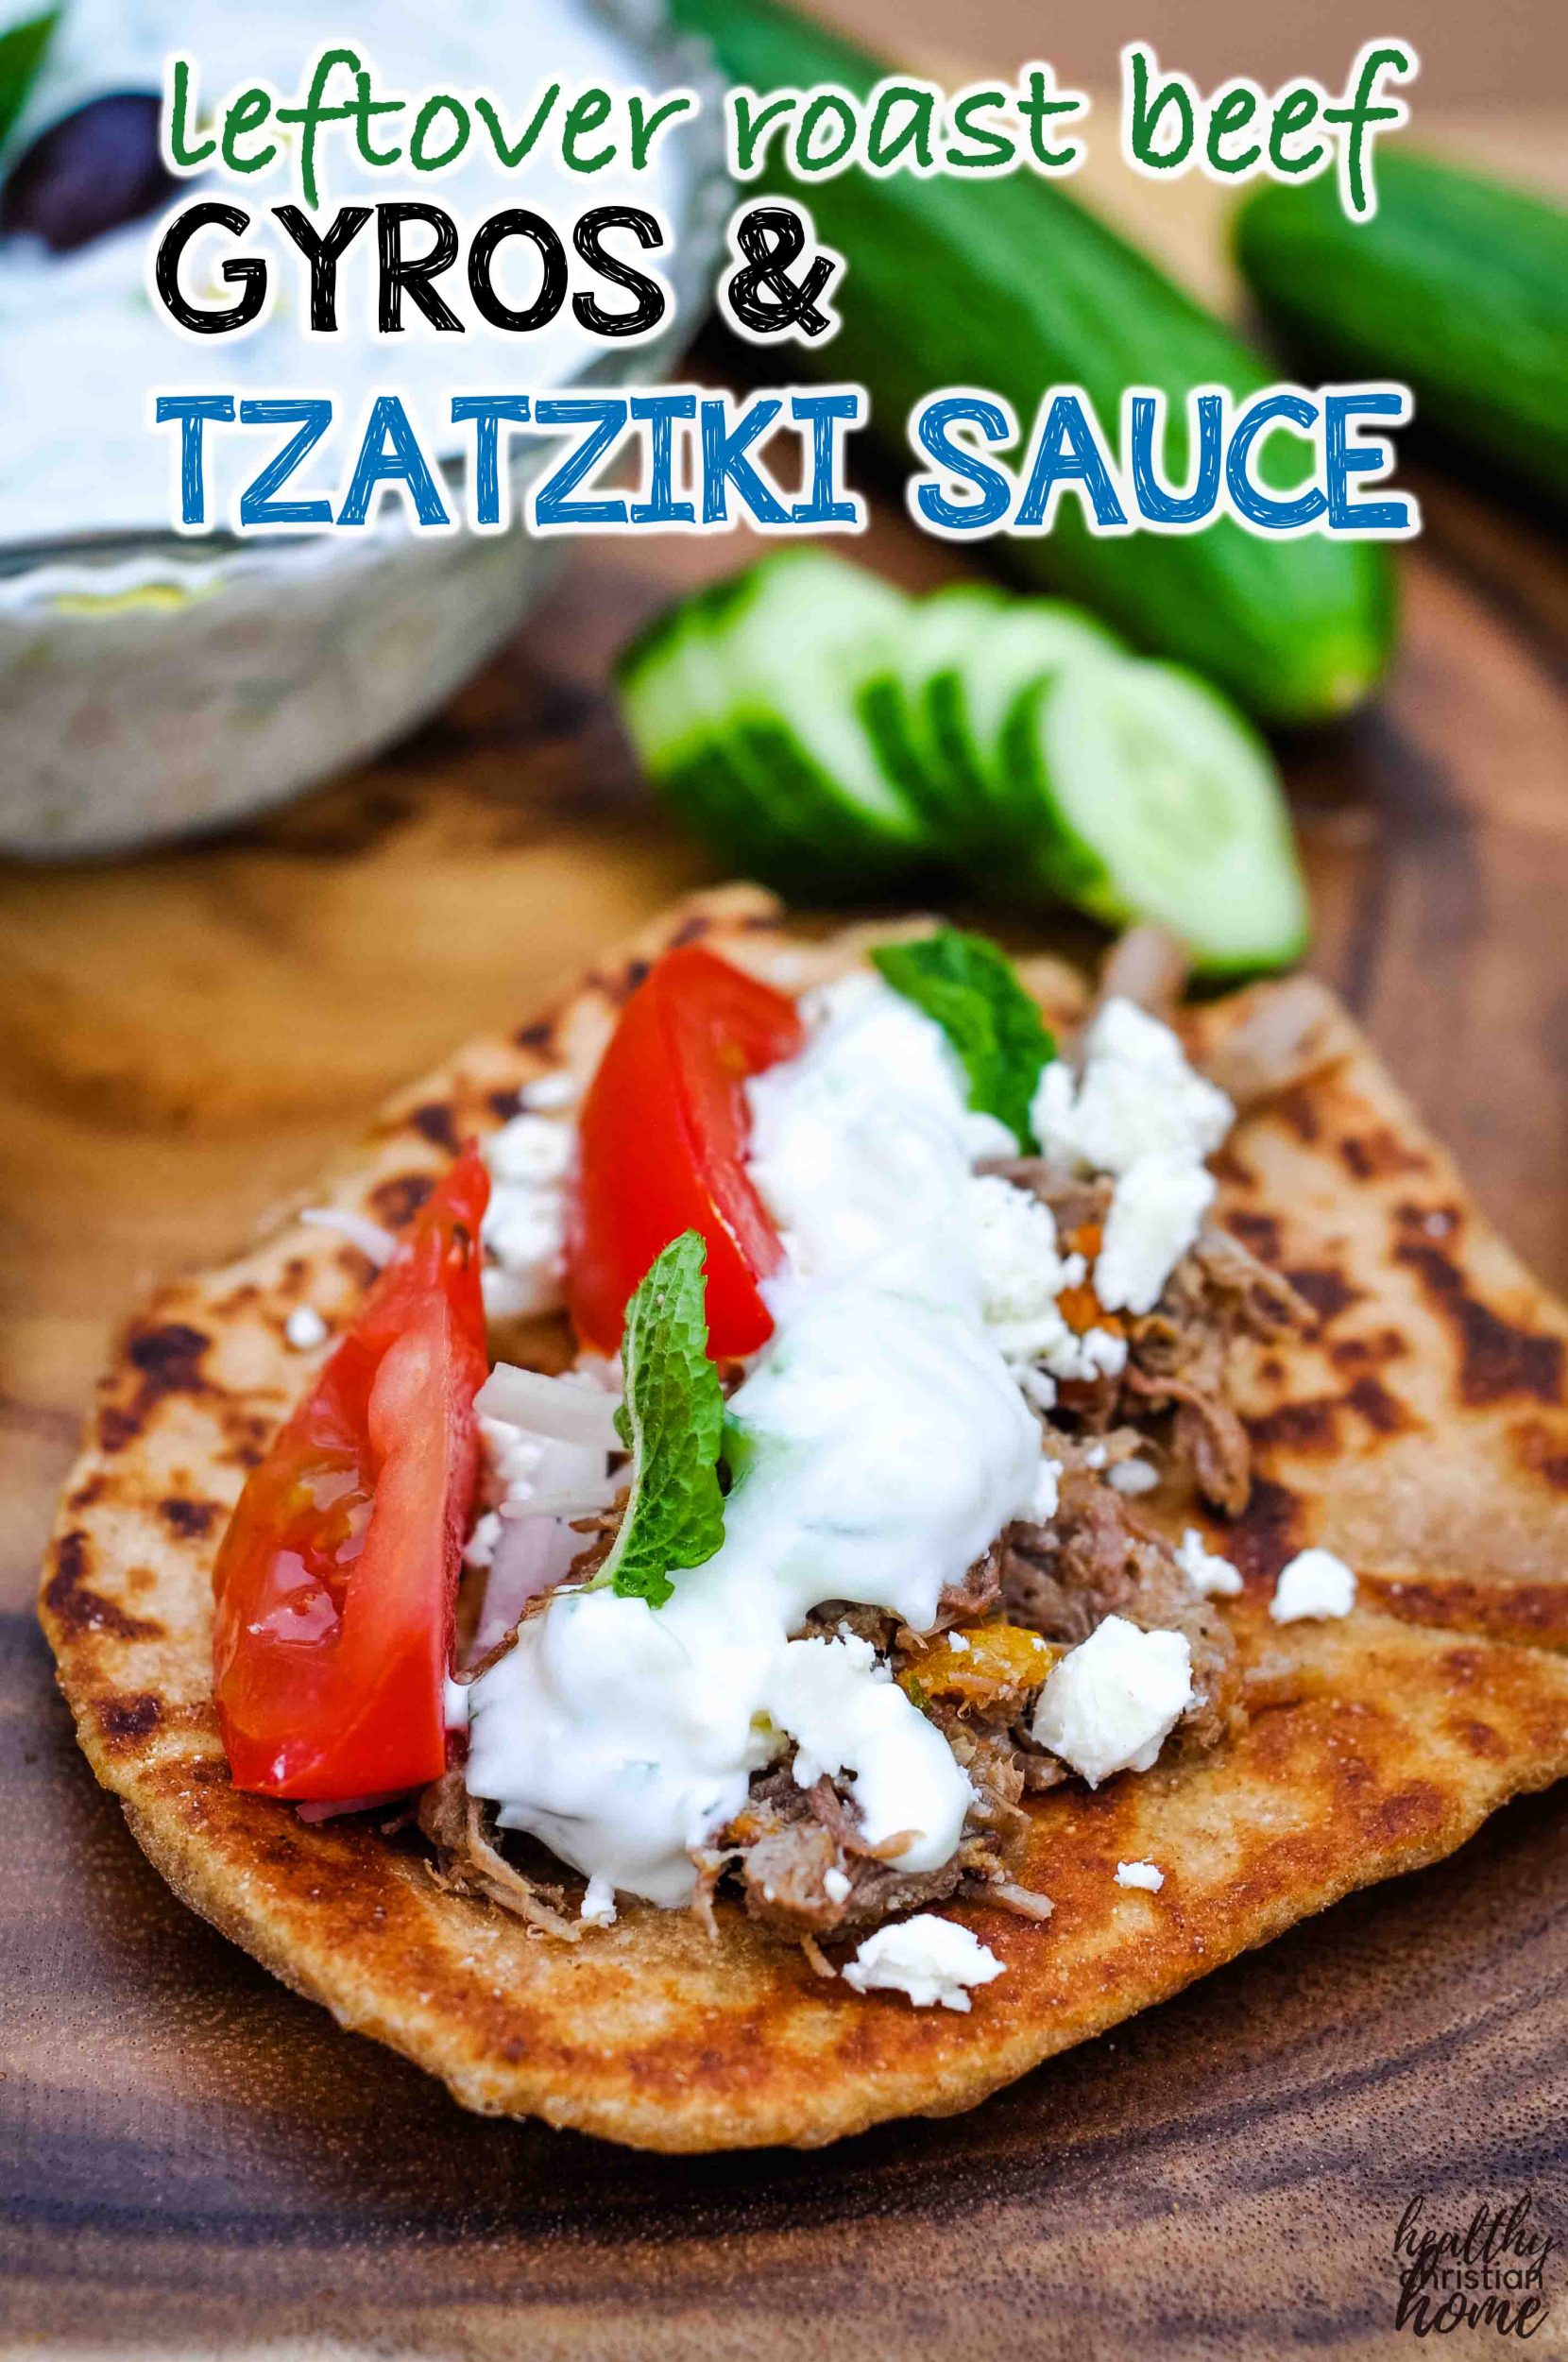 Roast beef gyros with topped with tzatziki sauce on a wooden board.